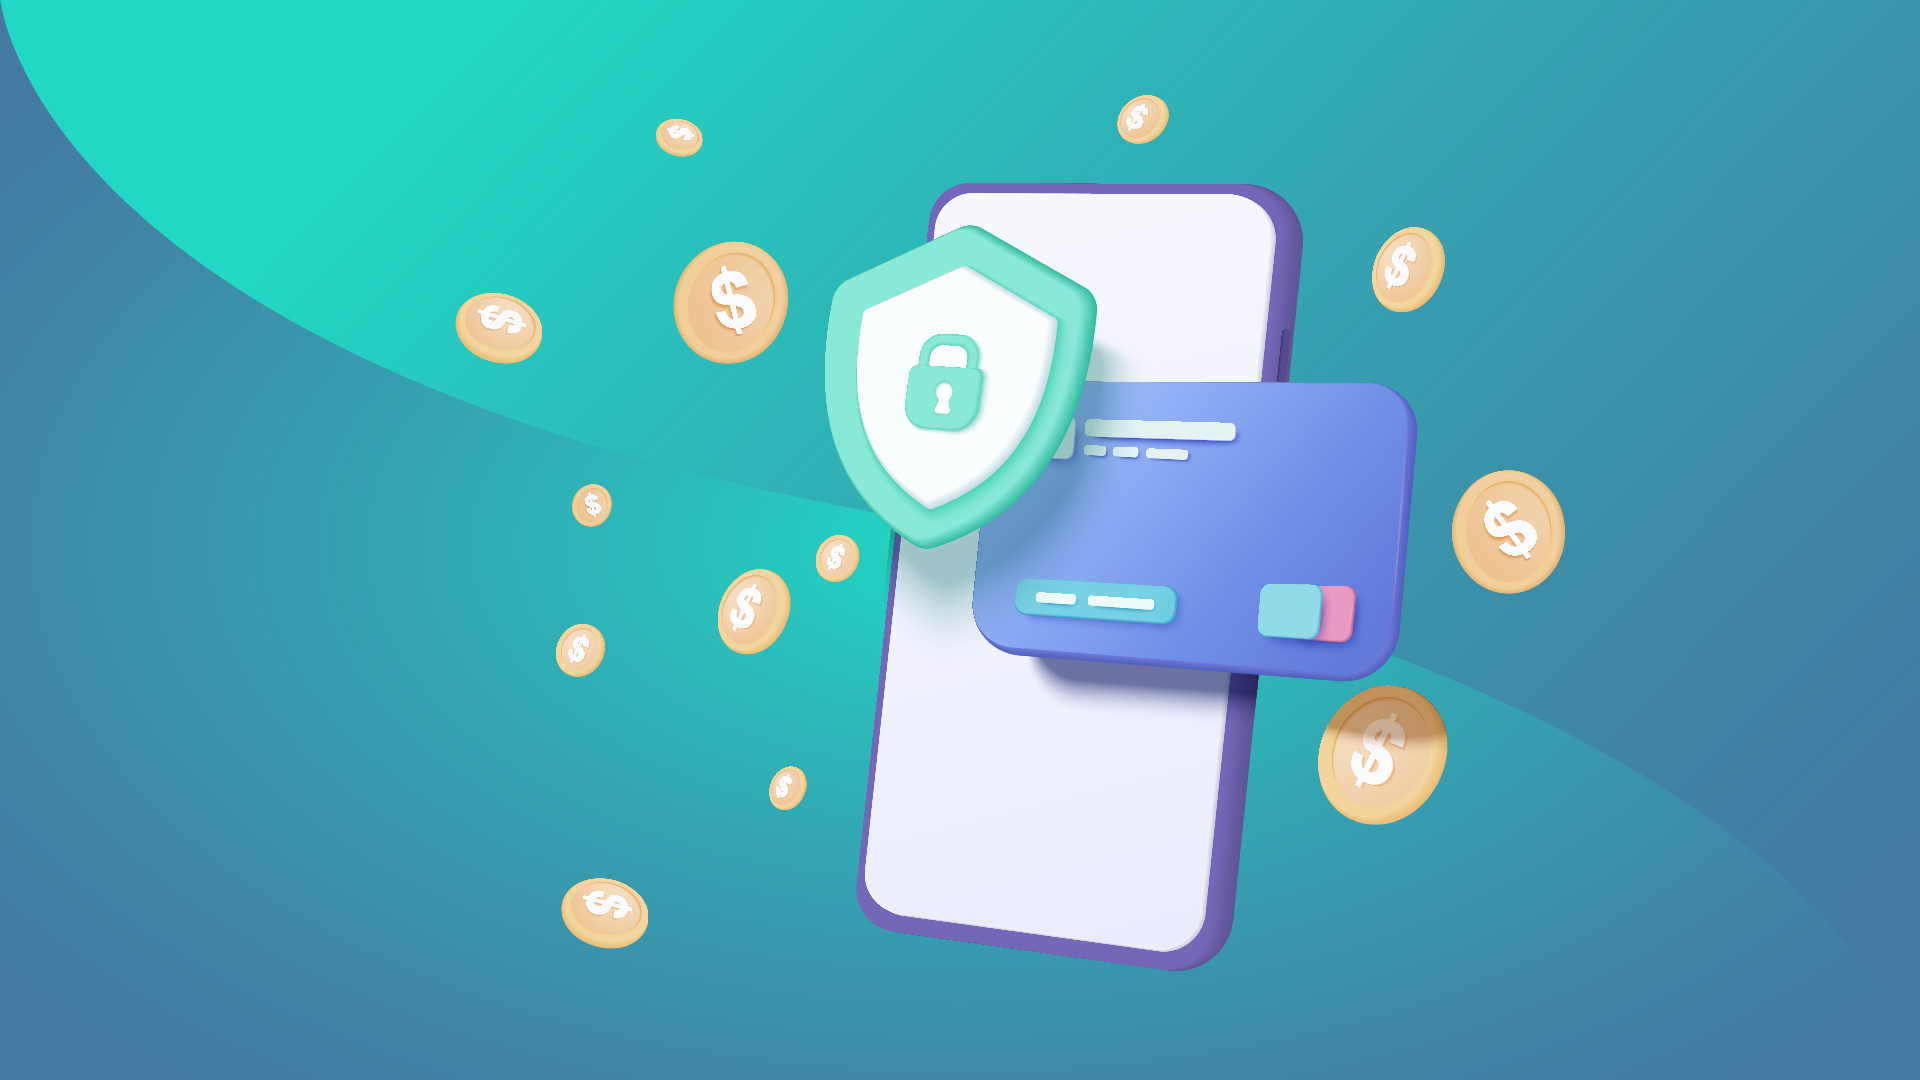 Illustration representing a mobile app with online banking security features